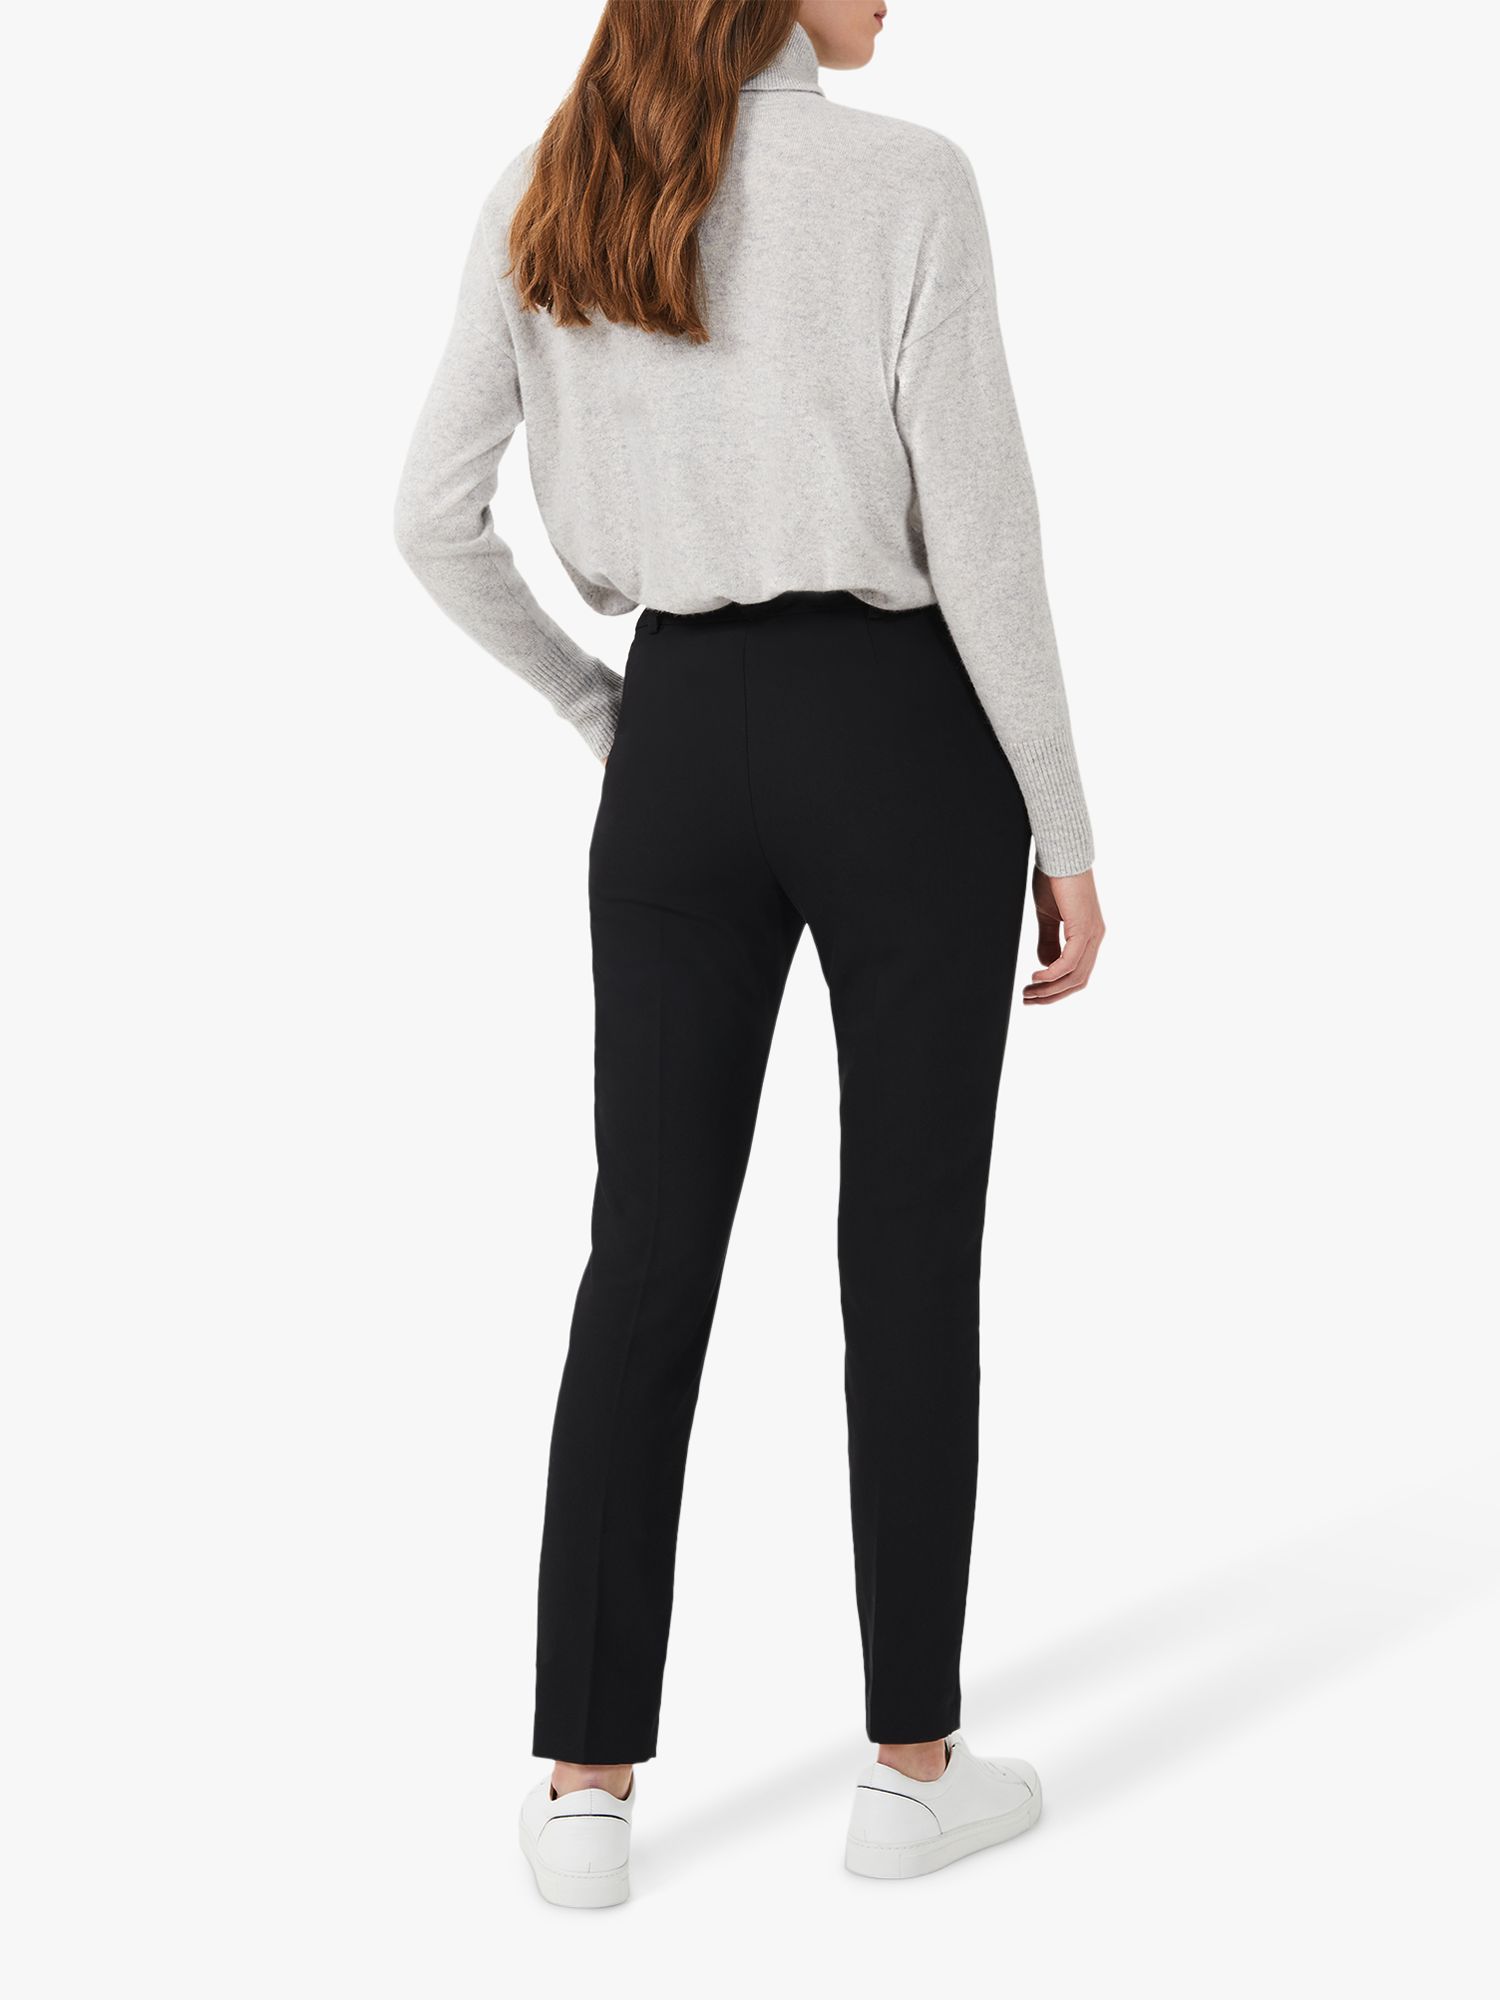 Hobbs Quin Tapered Trousers, Black at John Lewis & Partners